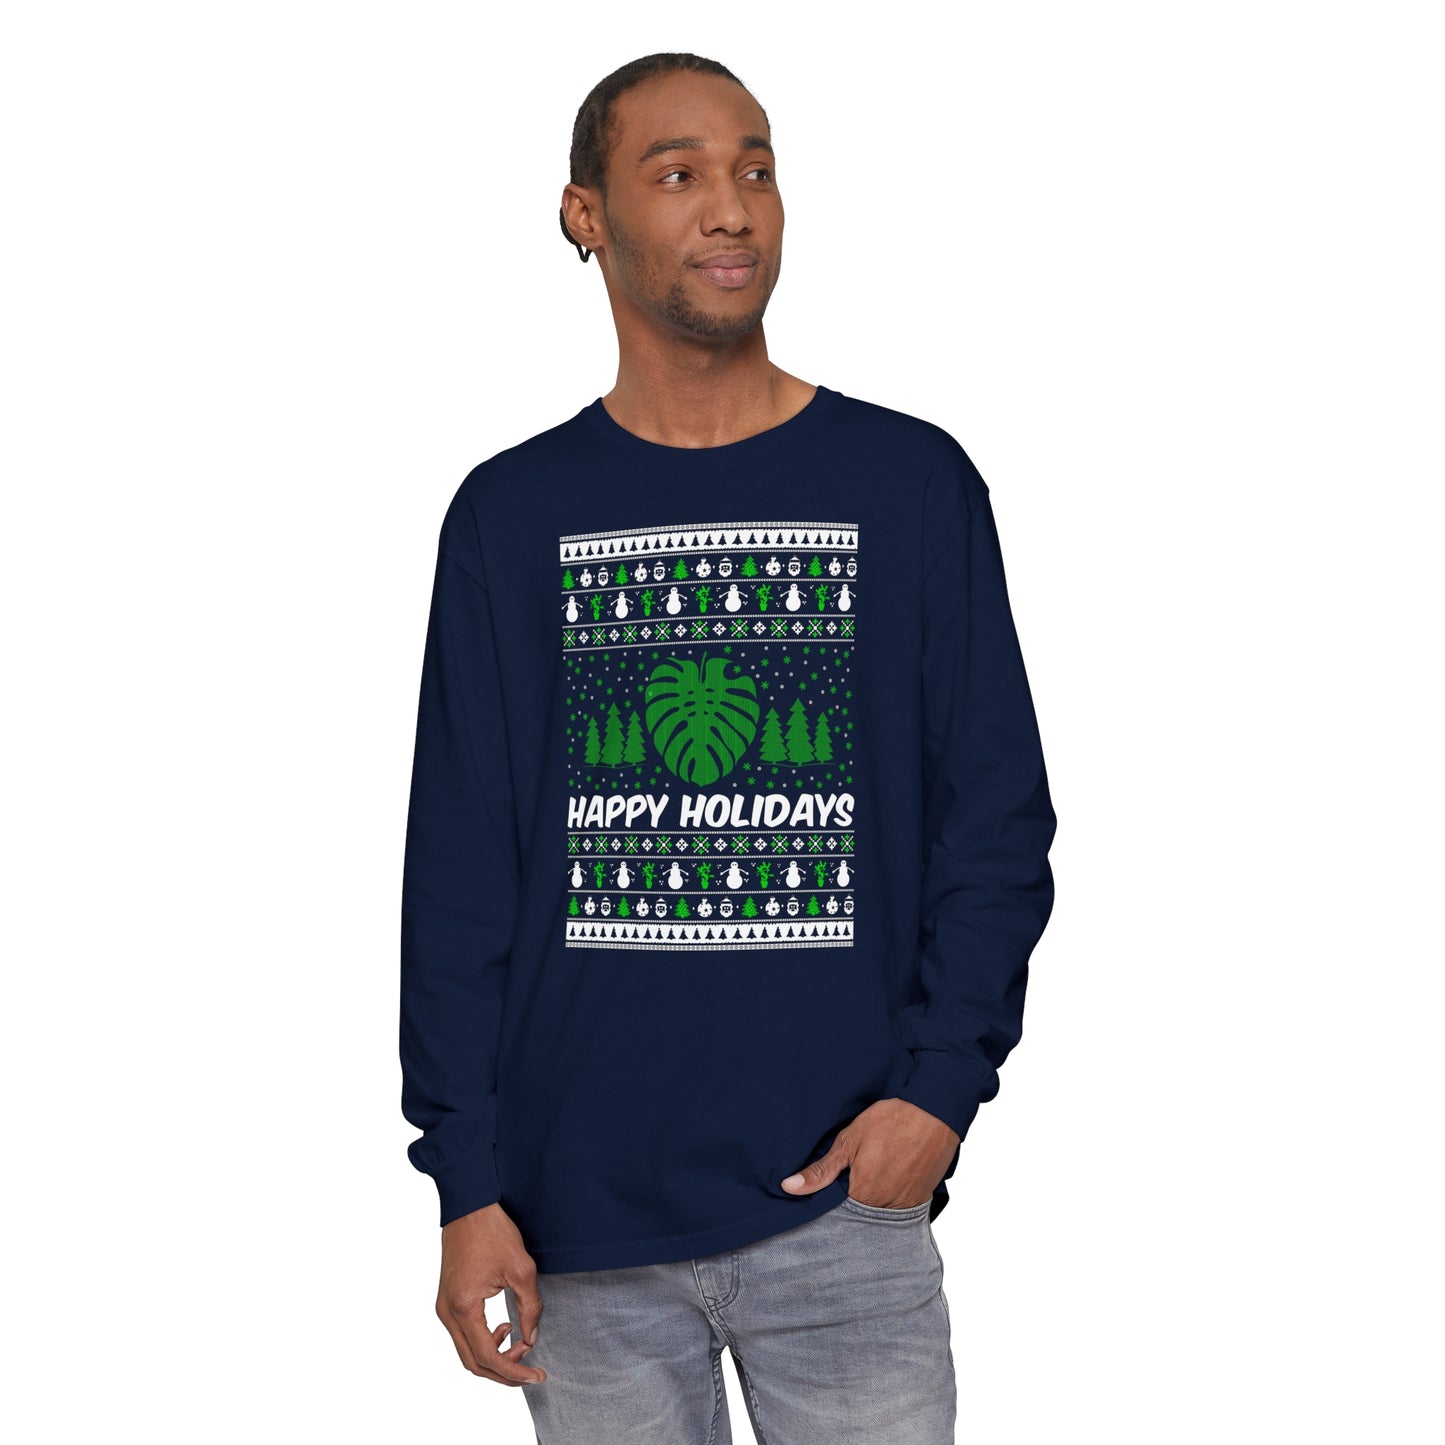 Happy holidays ugly sweater Unisex Jersey Long Sleeve Tee. Christmas ugly sweater with monstera leaf and snow flakes.